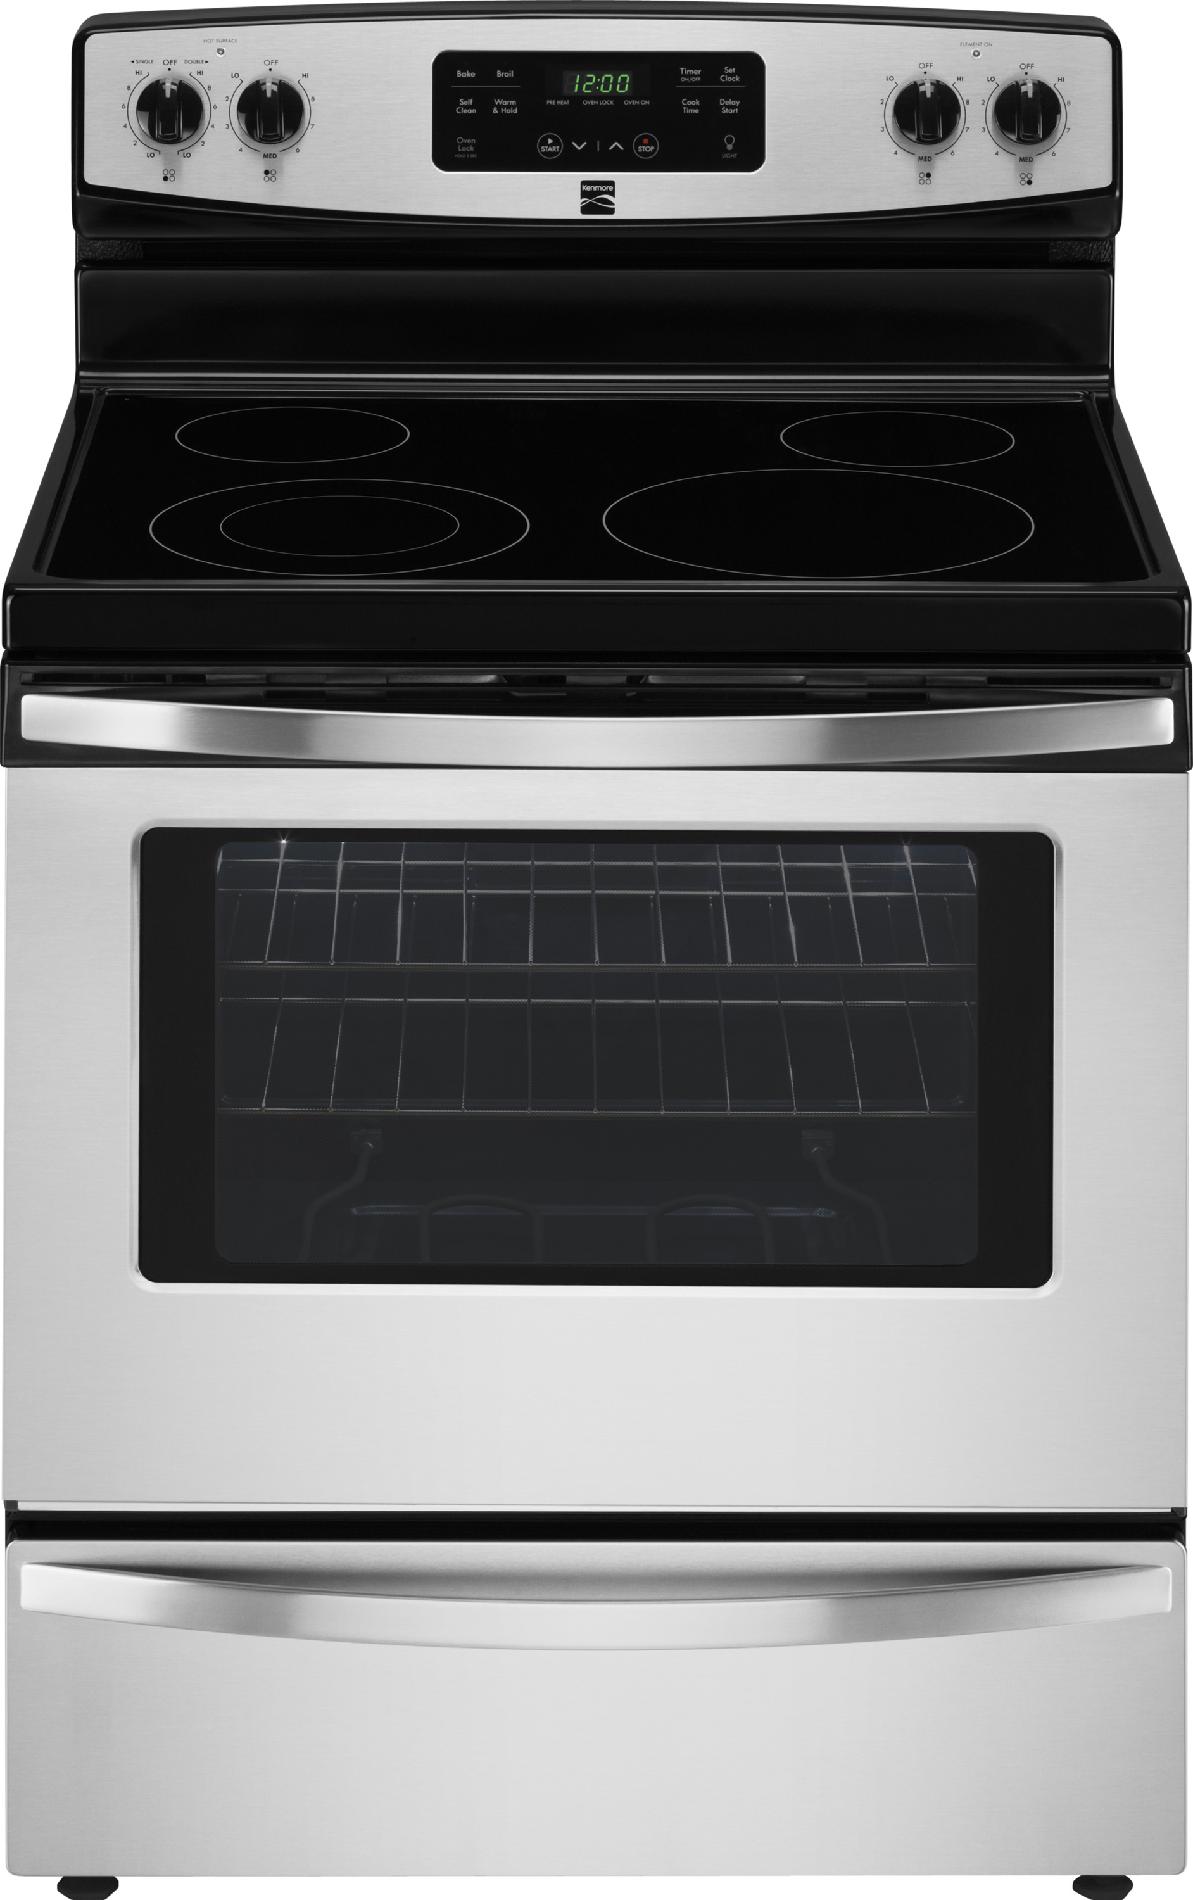 0012505508189 - 94173 5.3 CU. FT. SELF-CLEANING ELECTRIC RANGE - STAINLESS STEEL